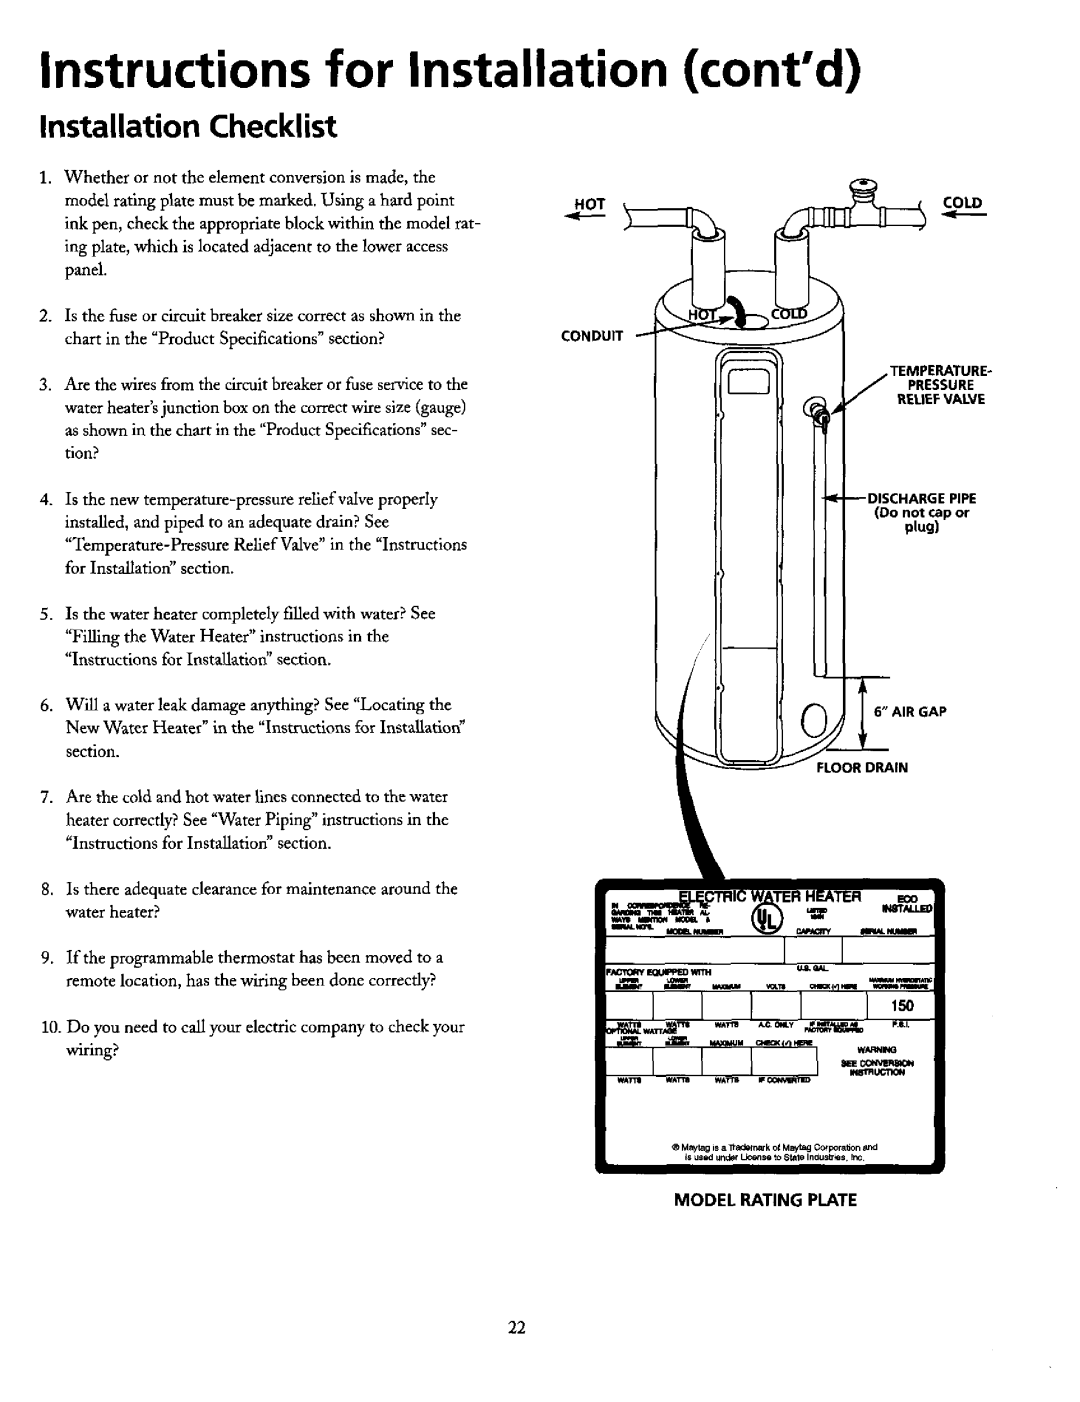 Maytag HE21250PC Instructions for Installation contd, Installation Checklist, Cold, Temperature Pressure Reliefvalve 